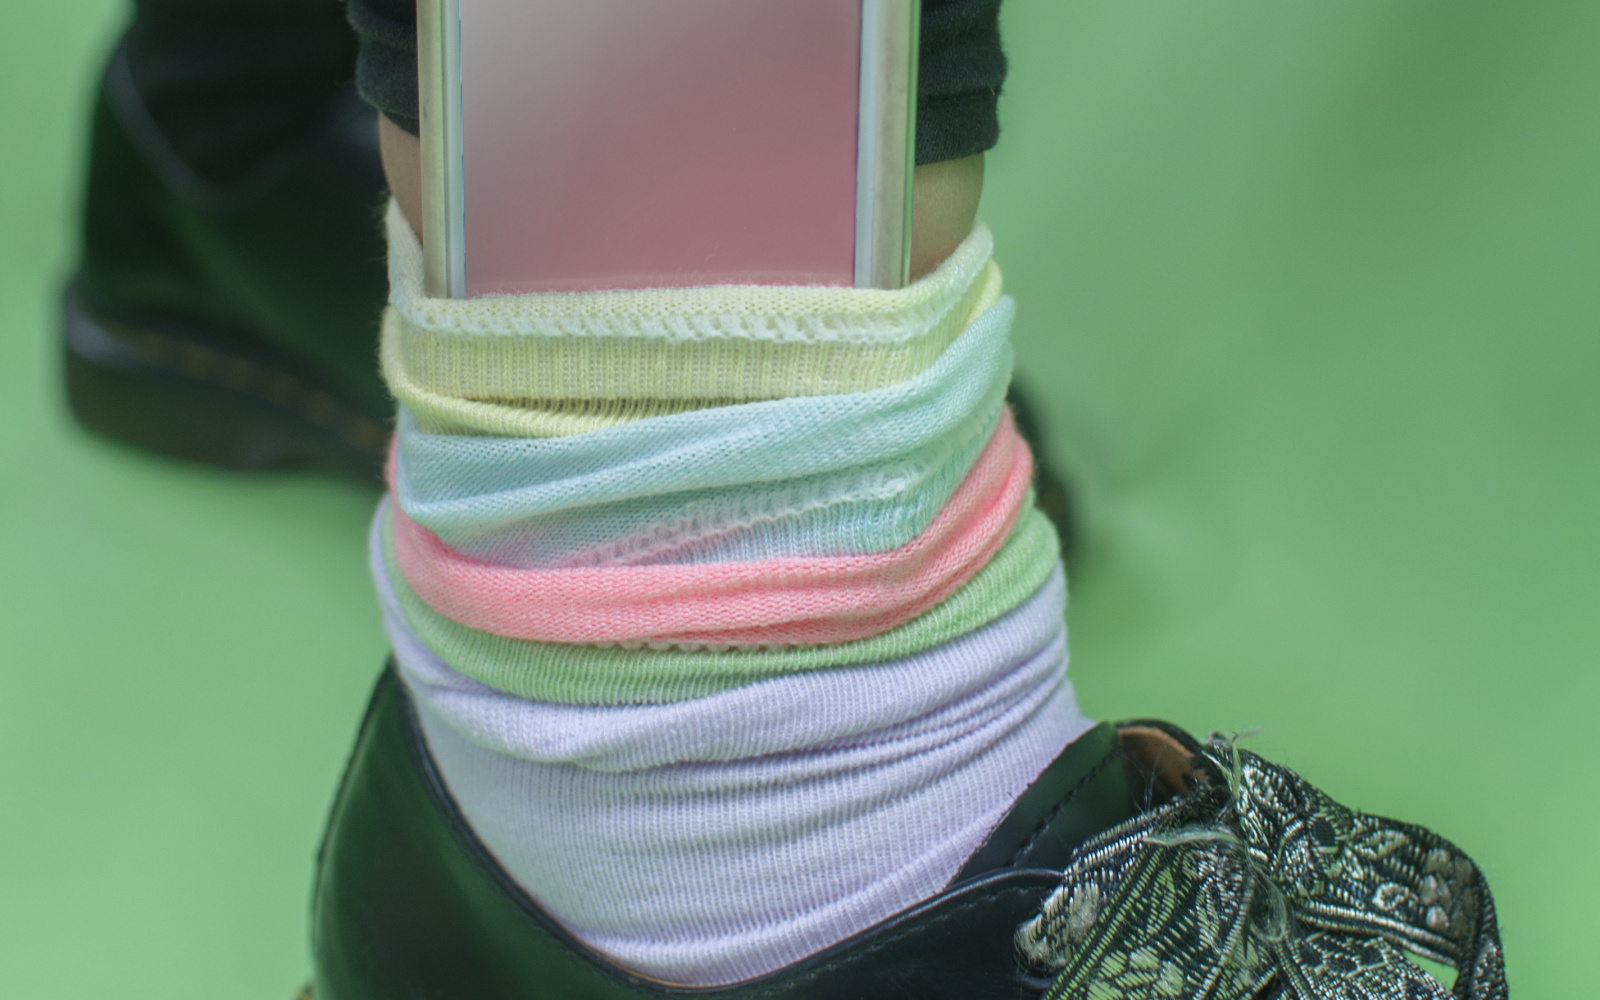 Foot and ankle with patent leather shoe and colourful sock, where a hand takes out a smartphone